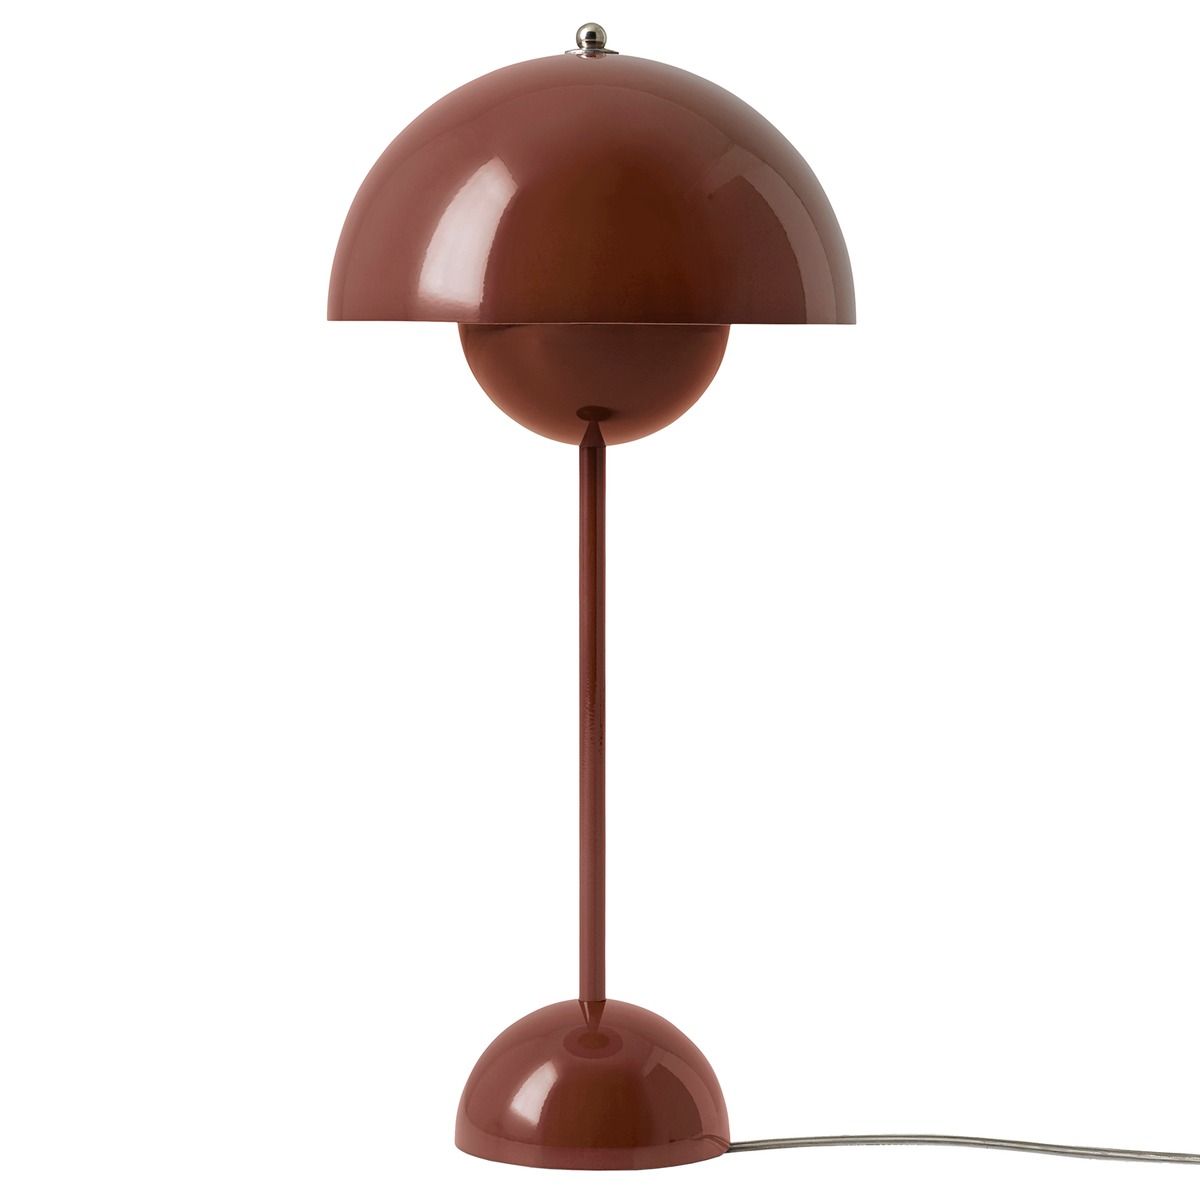 &Tradition Flowerpot Vp3 Table Lamp, Red Brown